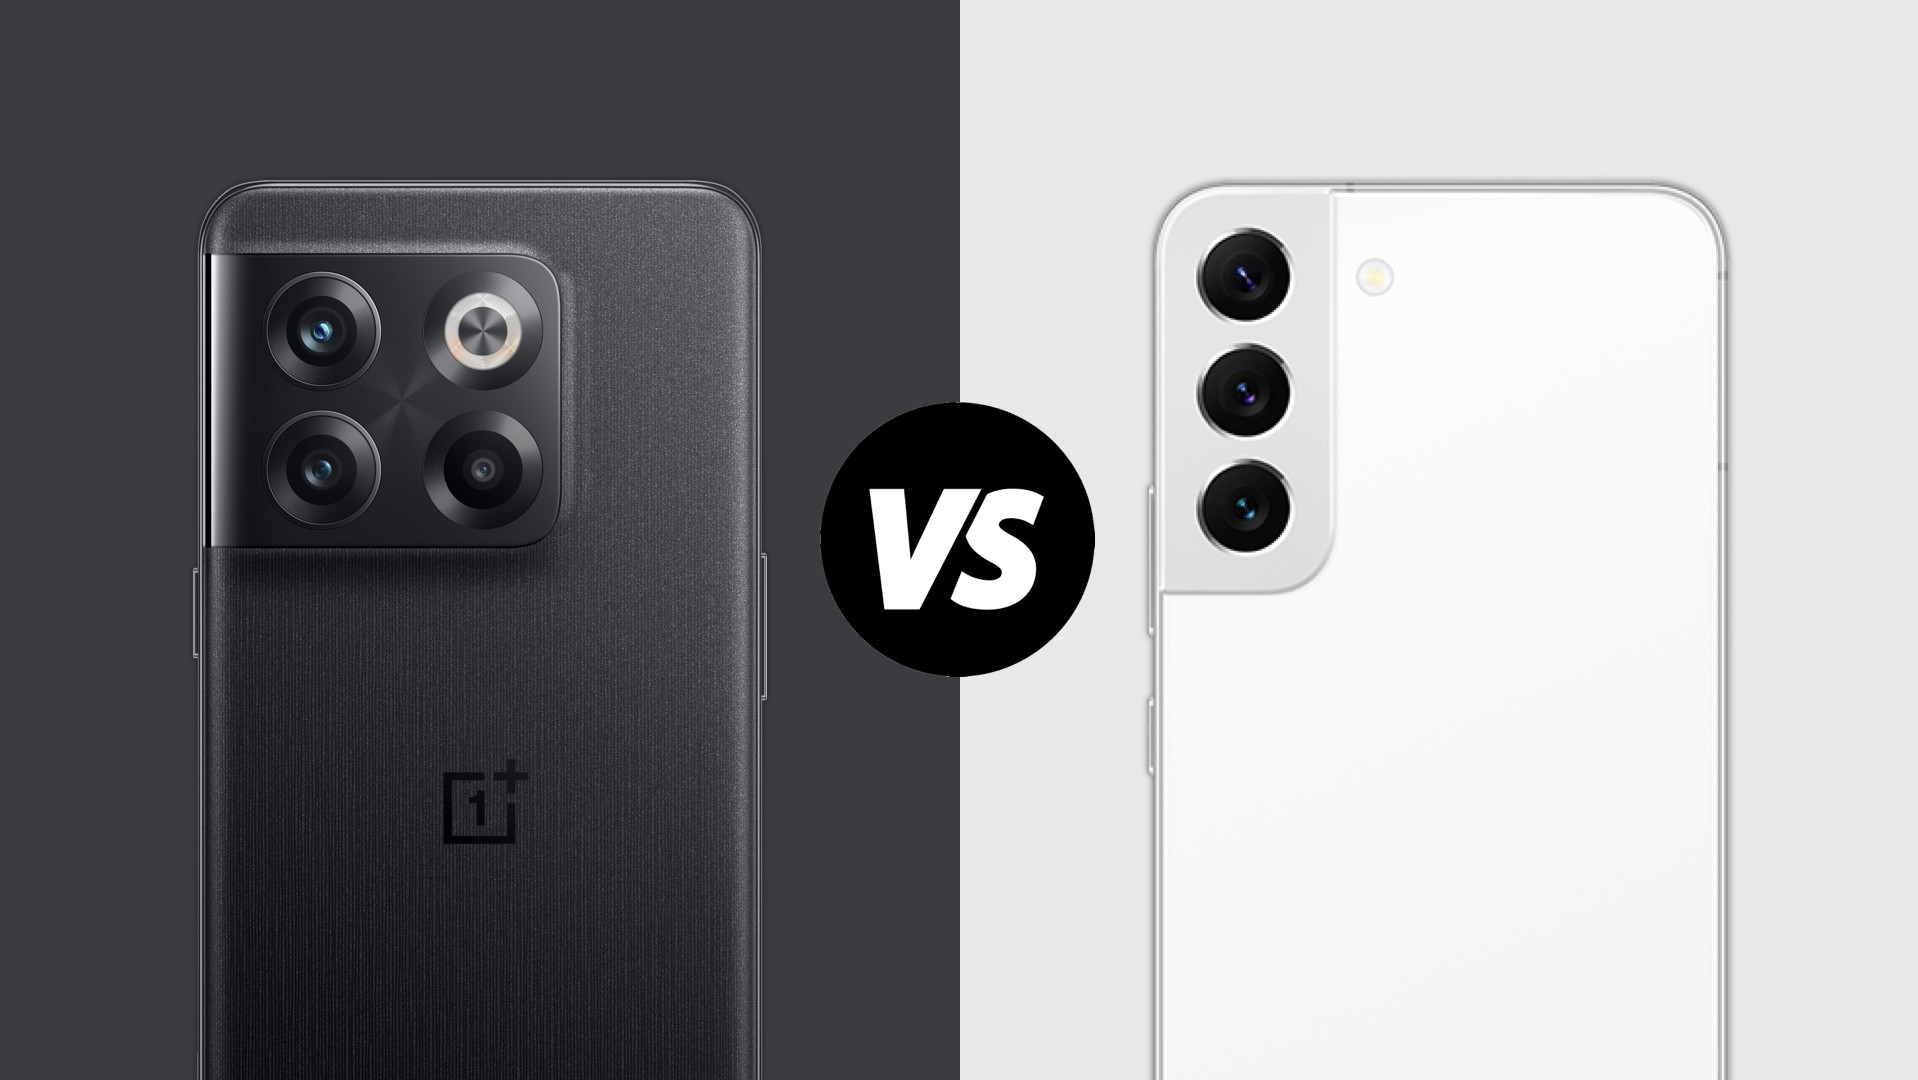 OnePlus 10T vs Samsung Galaxy S22: Which one should you buy?